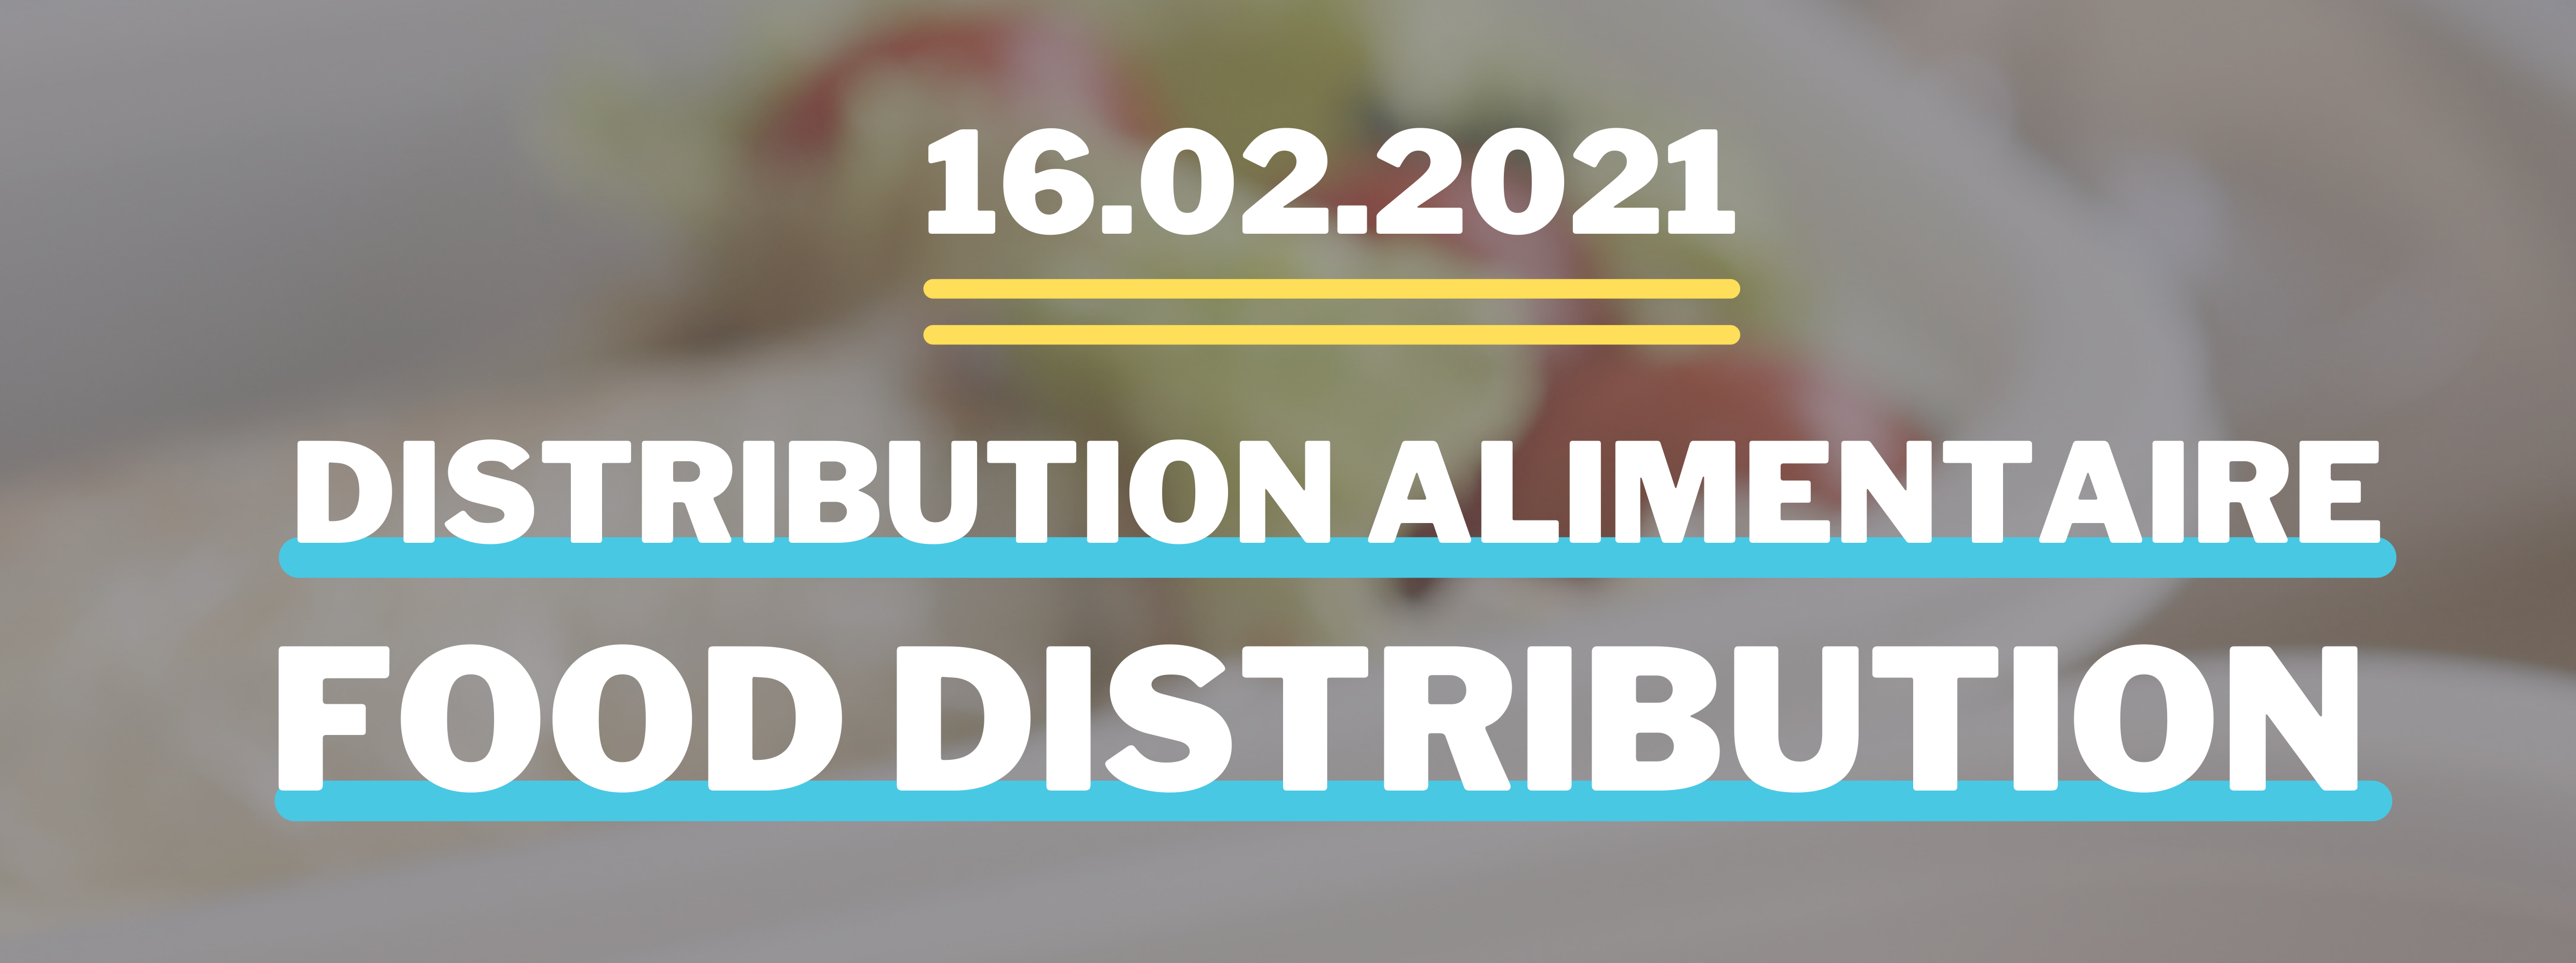 Image distribution alimentaire